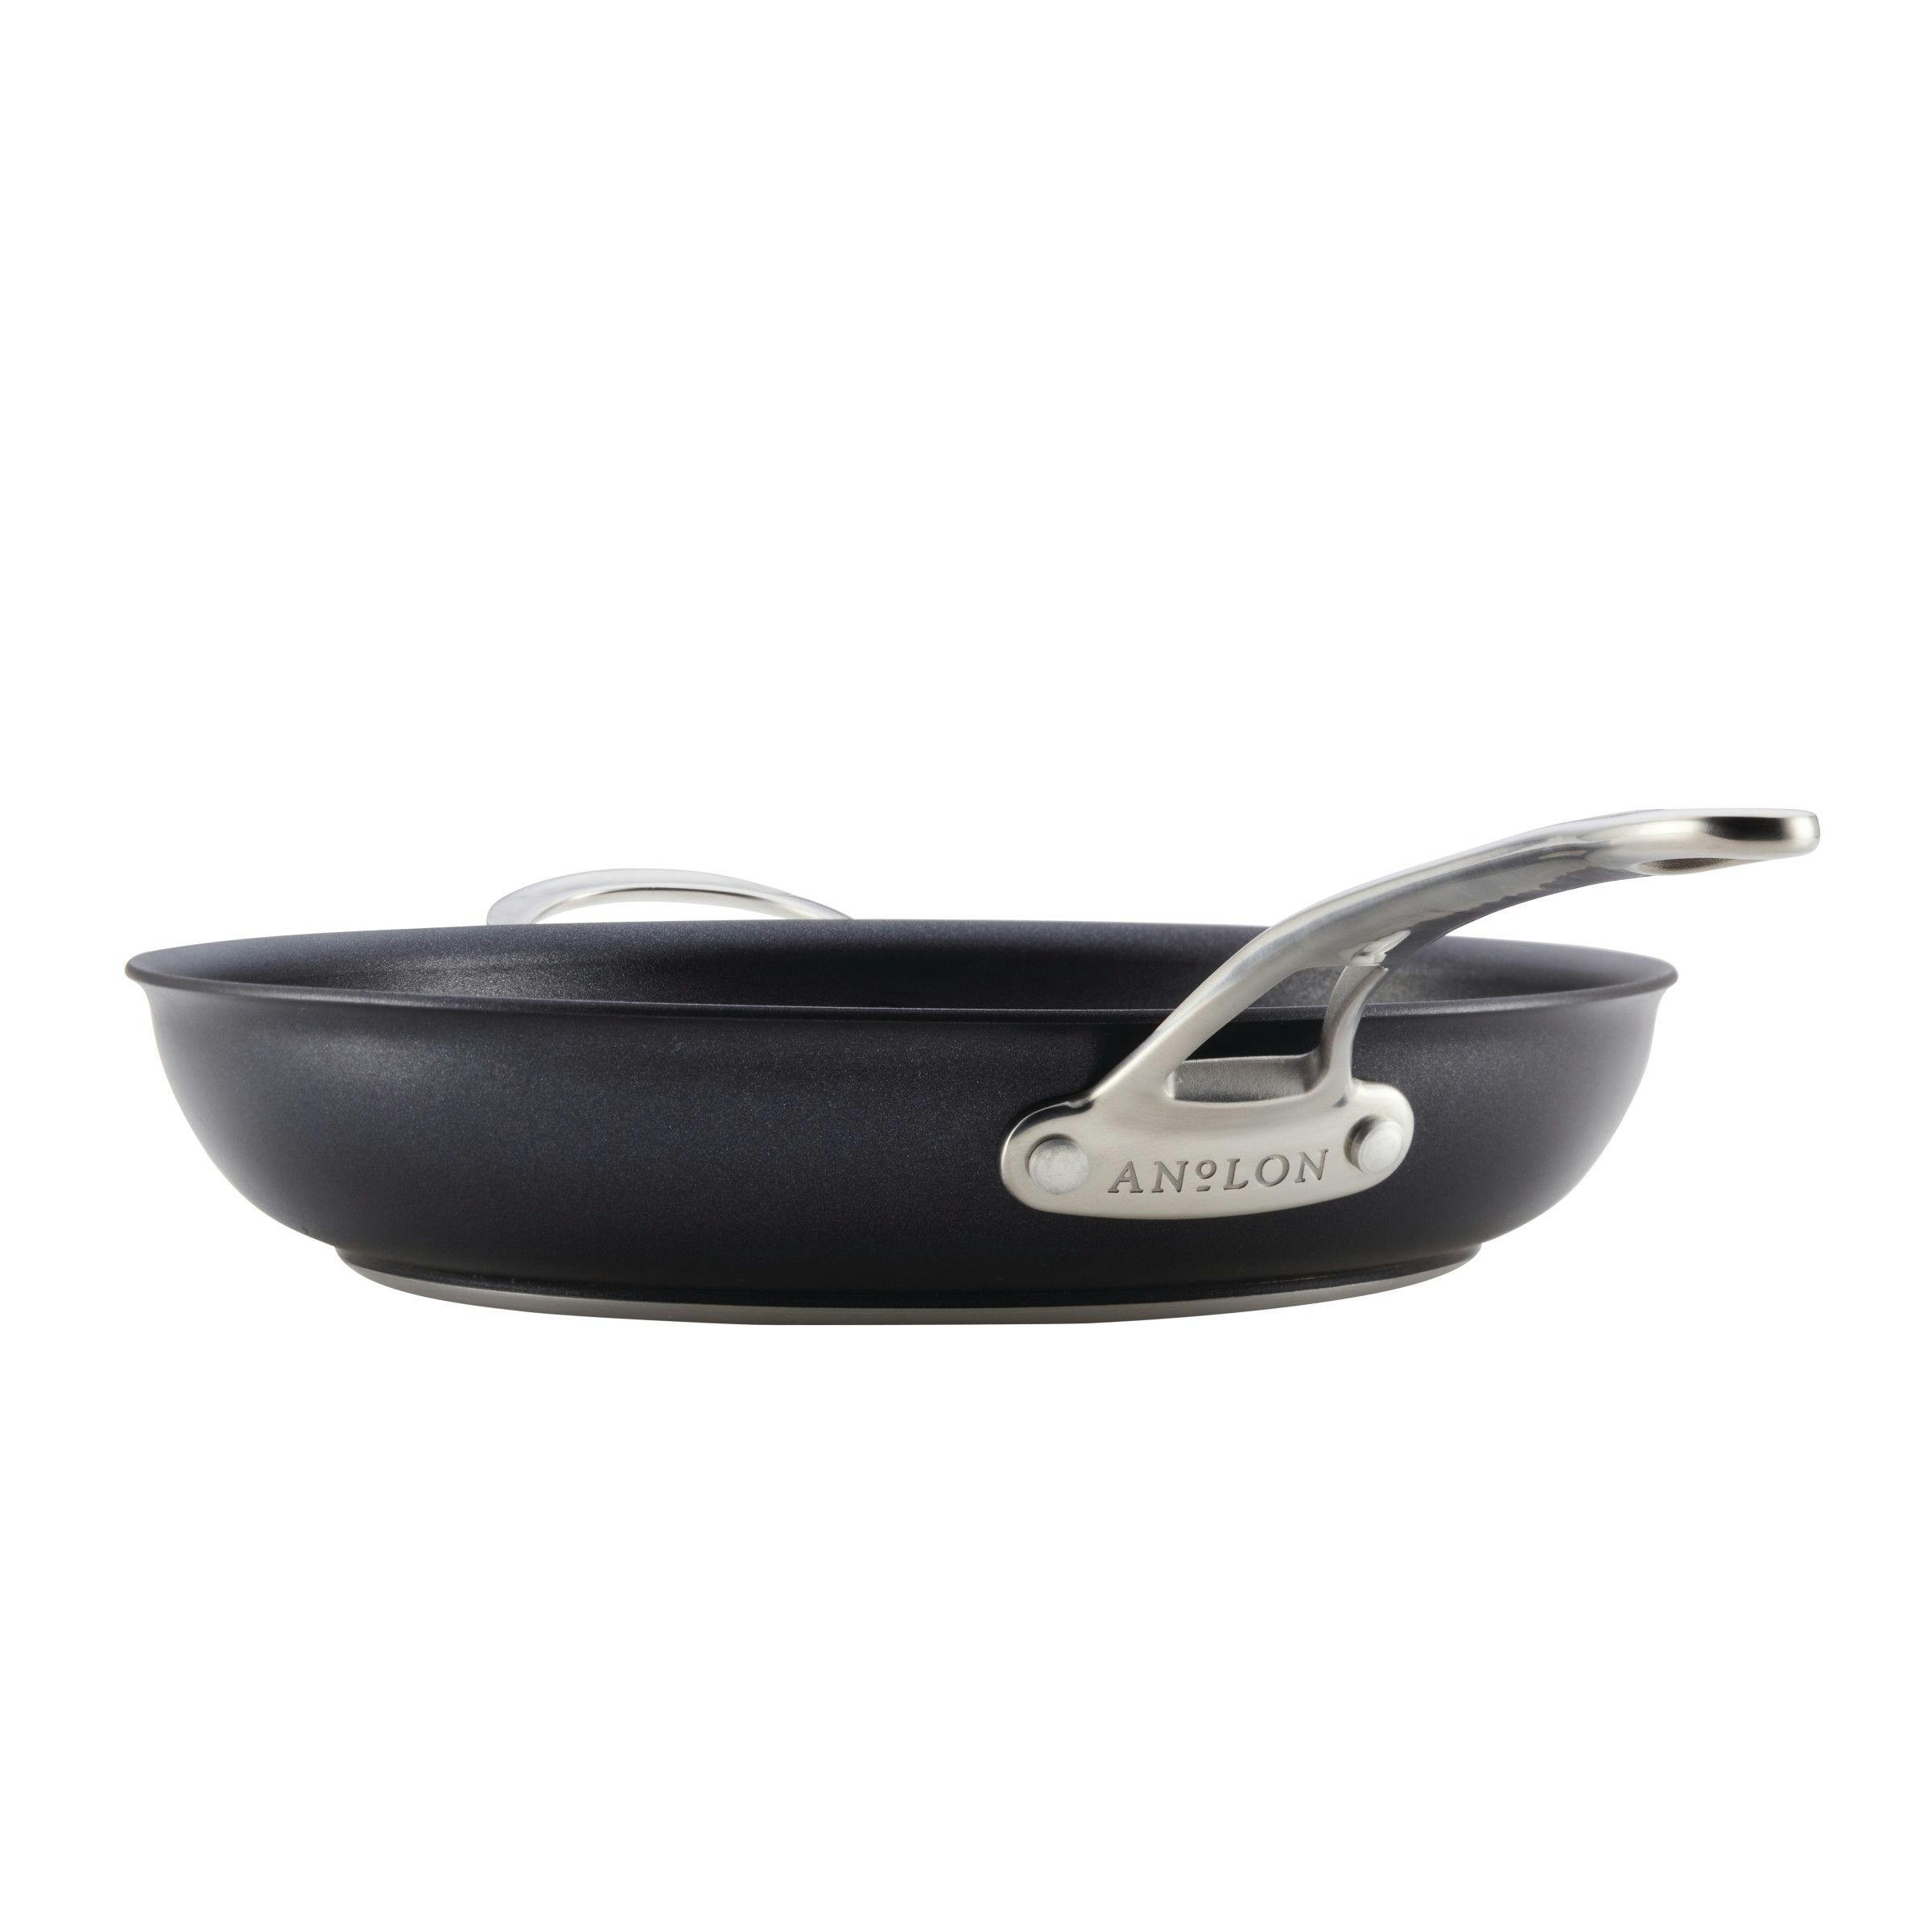 Anolon X Hybrid Nonstick Induction Frying Pan With Helper Handle, 12-Inch, Super Dark Gray